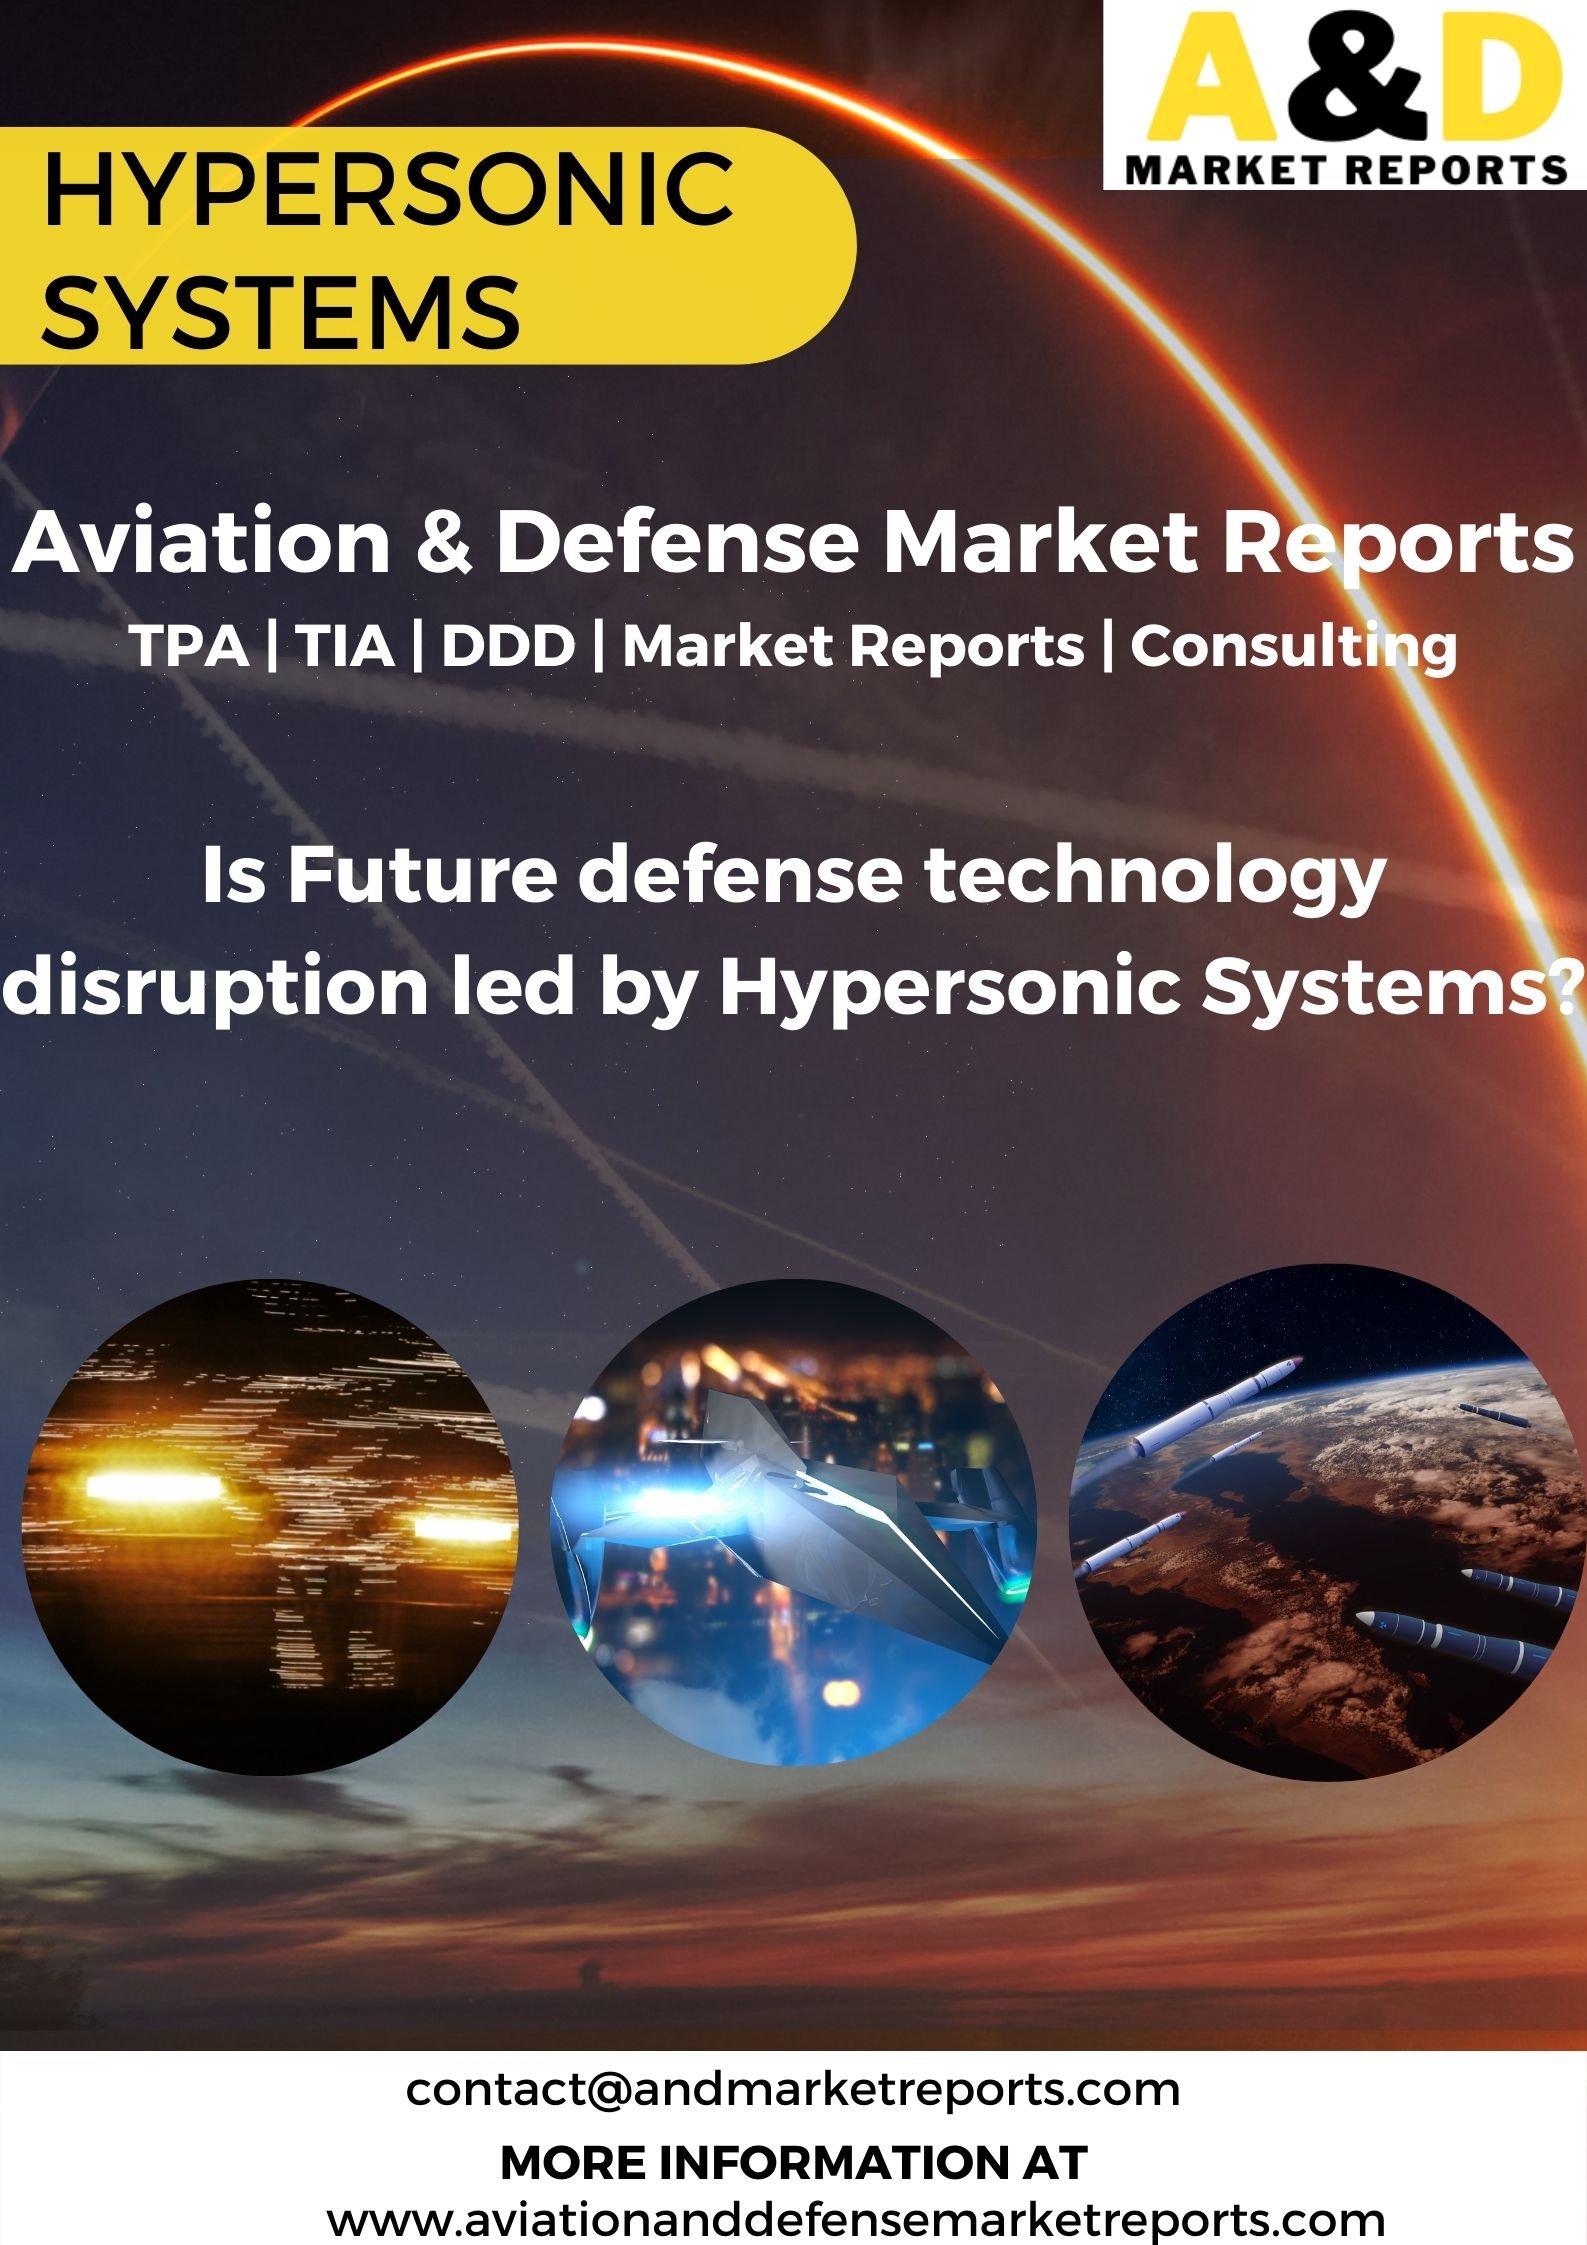 Is the Future Defense Technology Disruption Led by Hypersonic Systems?